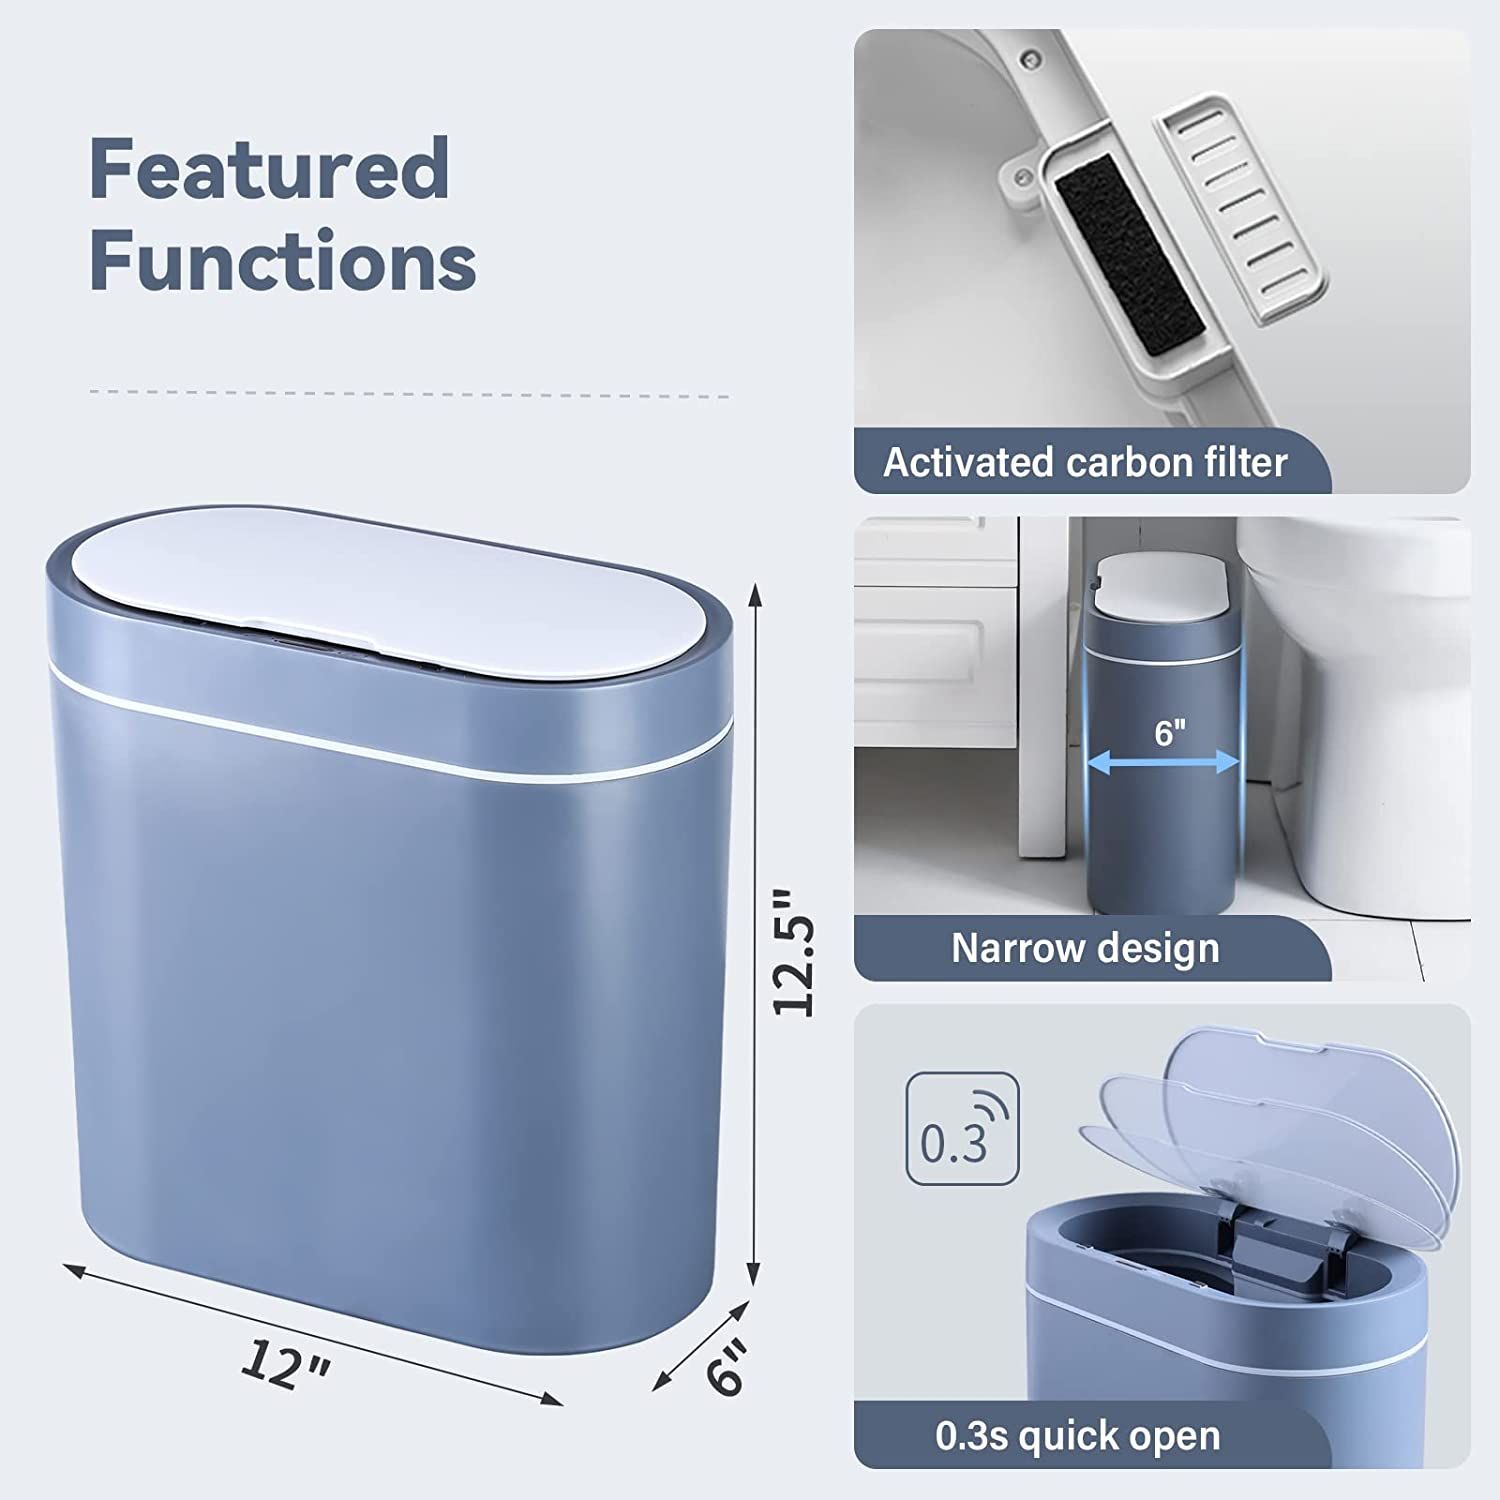 Keep Your Desk Clean and Chic With This Elpheco Mini Trash Can